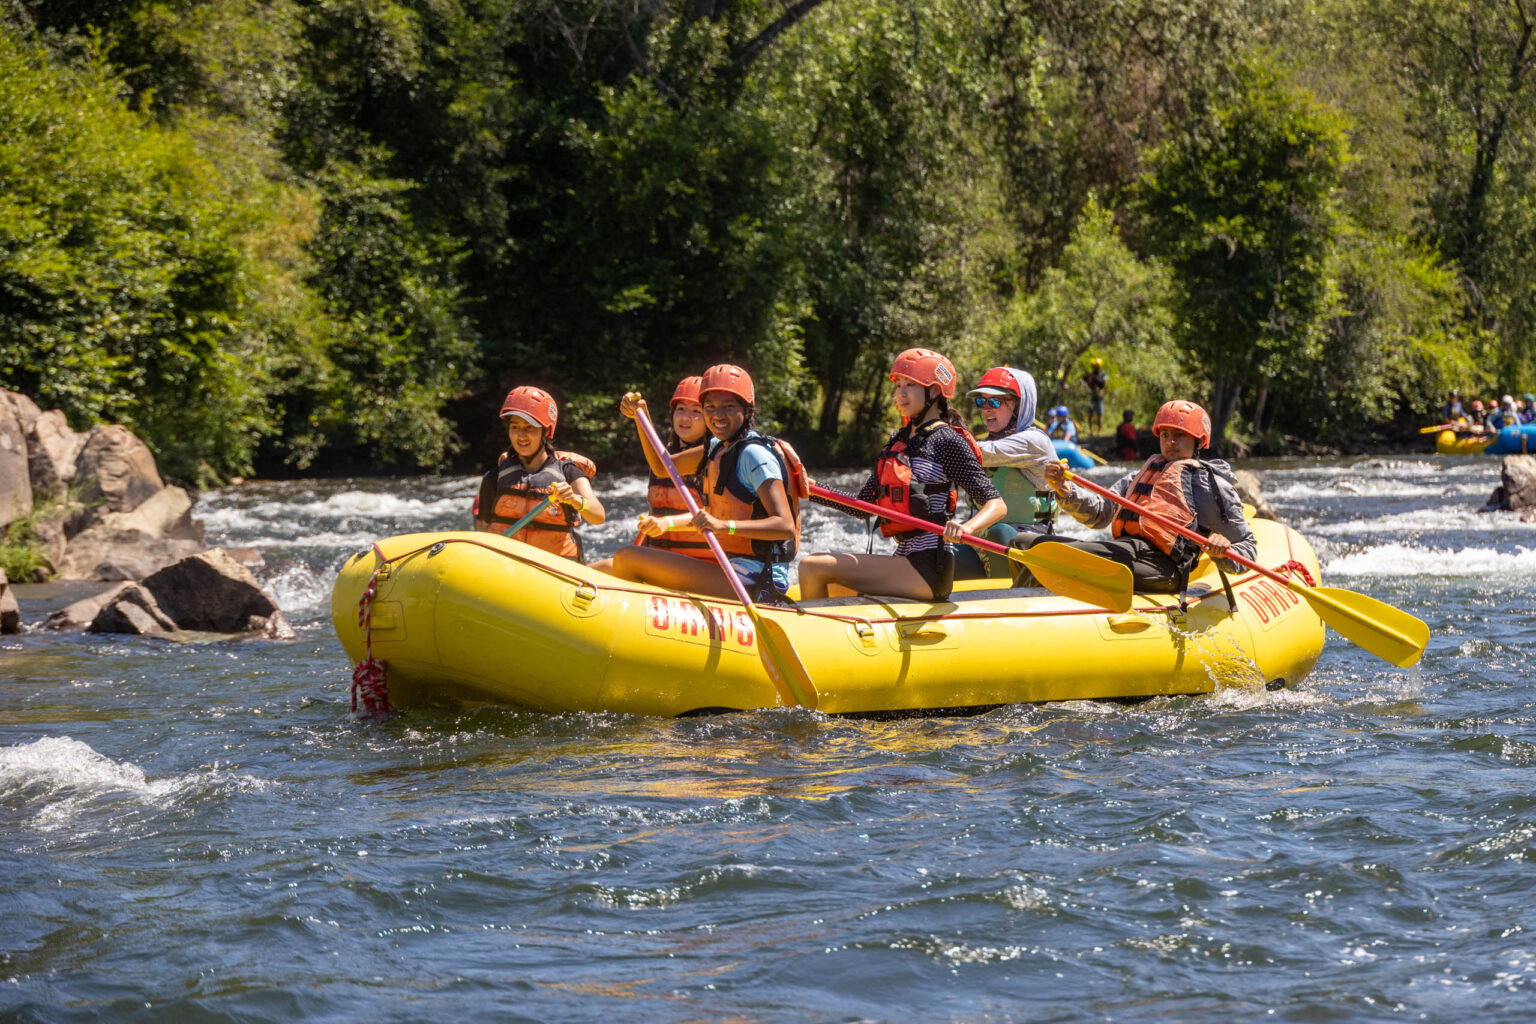 Group of youth rafting down a river.